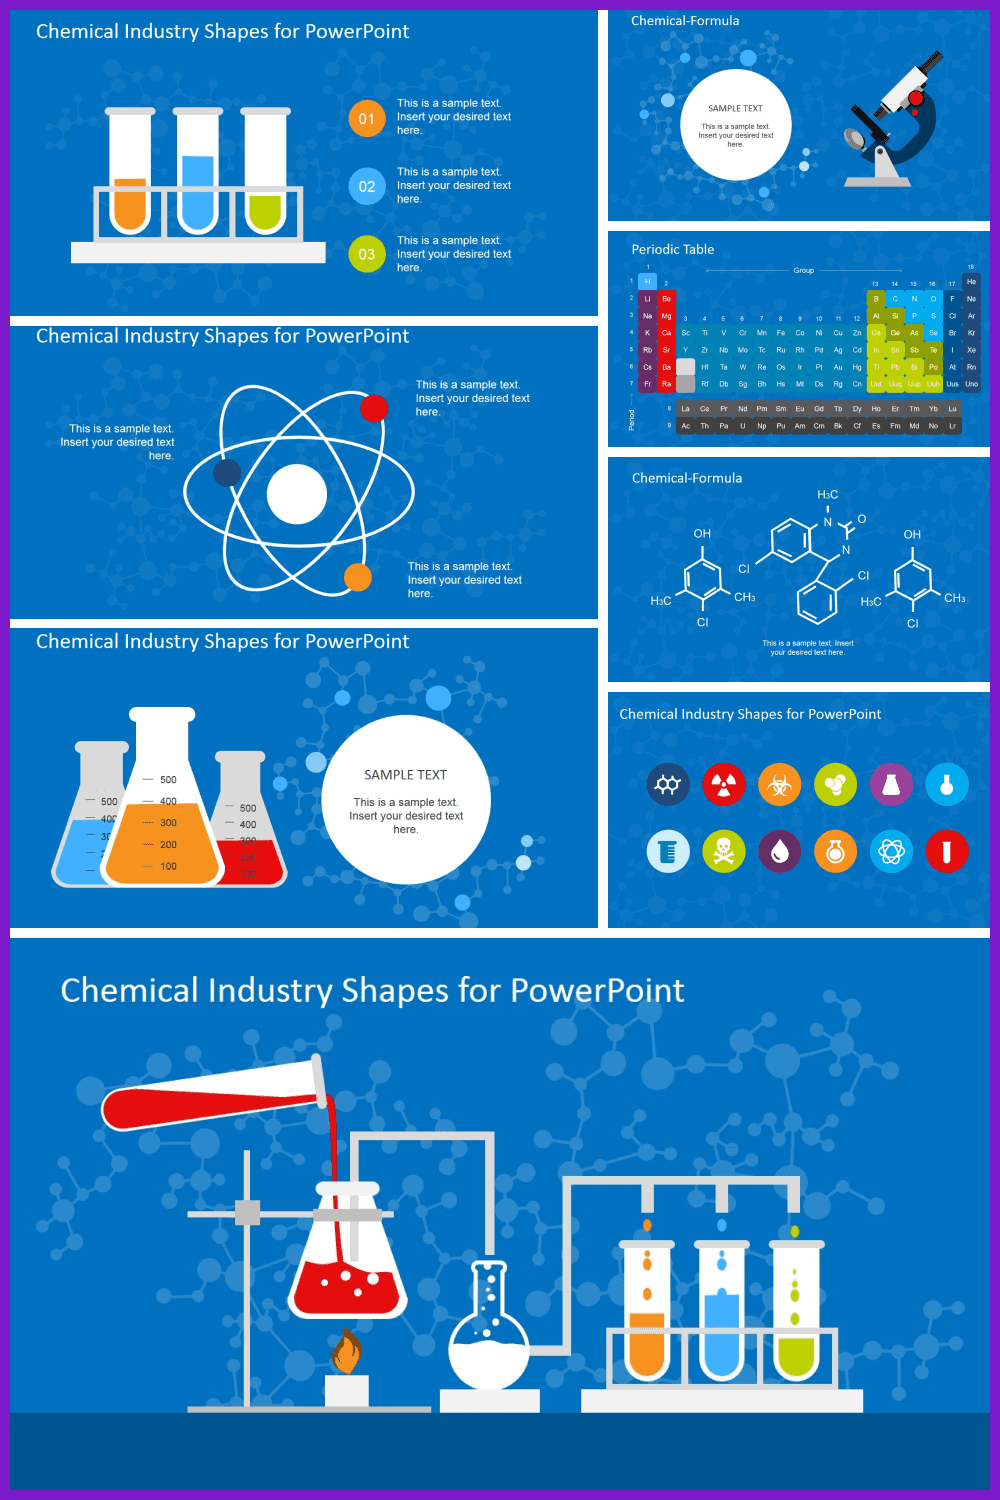 Chemical Industry Shapes for PowerPoint.